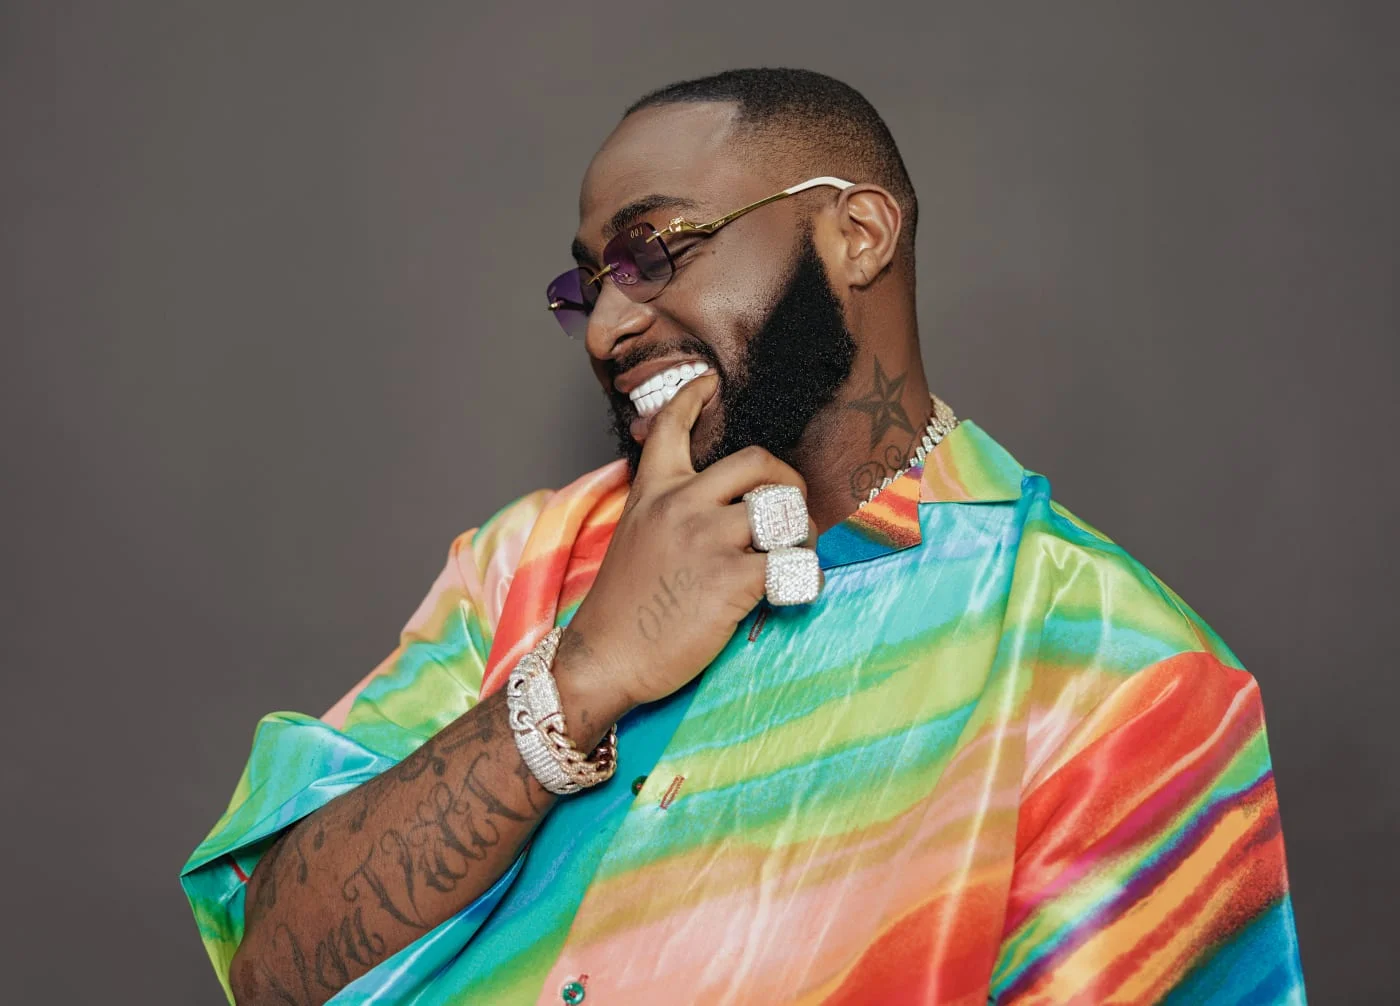 Davido Shares Father’s Supportive Words Amid Grammy Loss: ‘I’m Still a Legend’